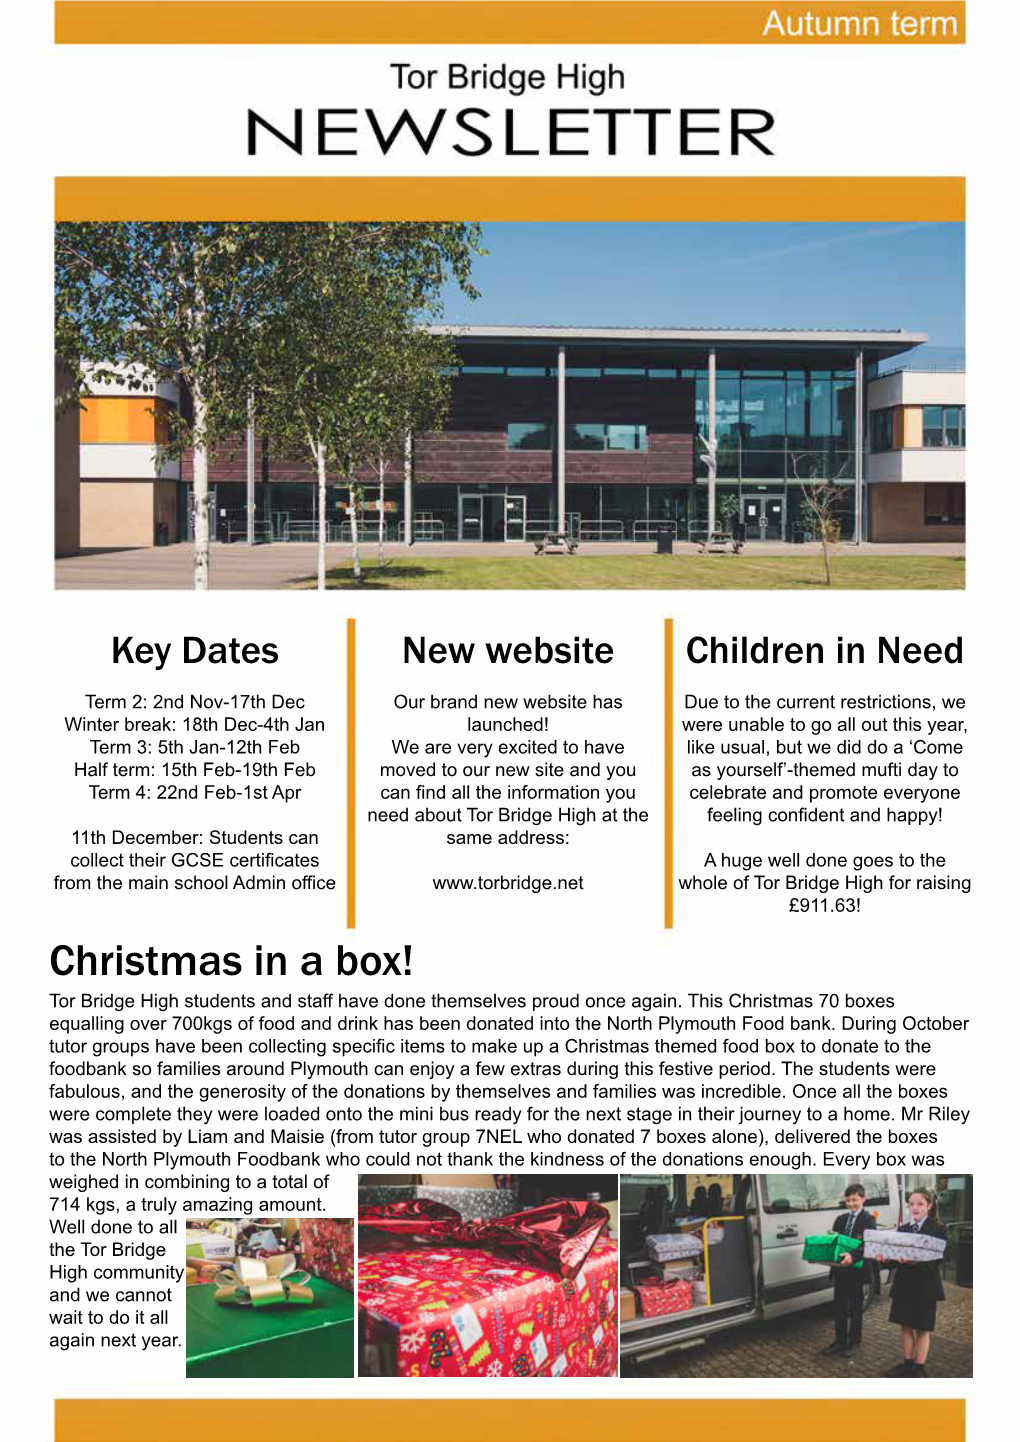 Christmas in a Box! Tor Bridge High Students and Staff Have Done Themselves Proud Once Again